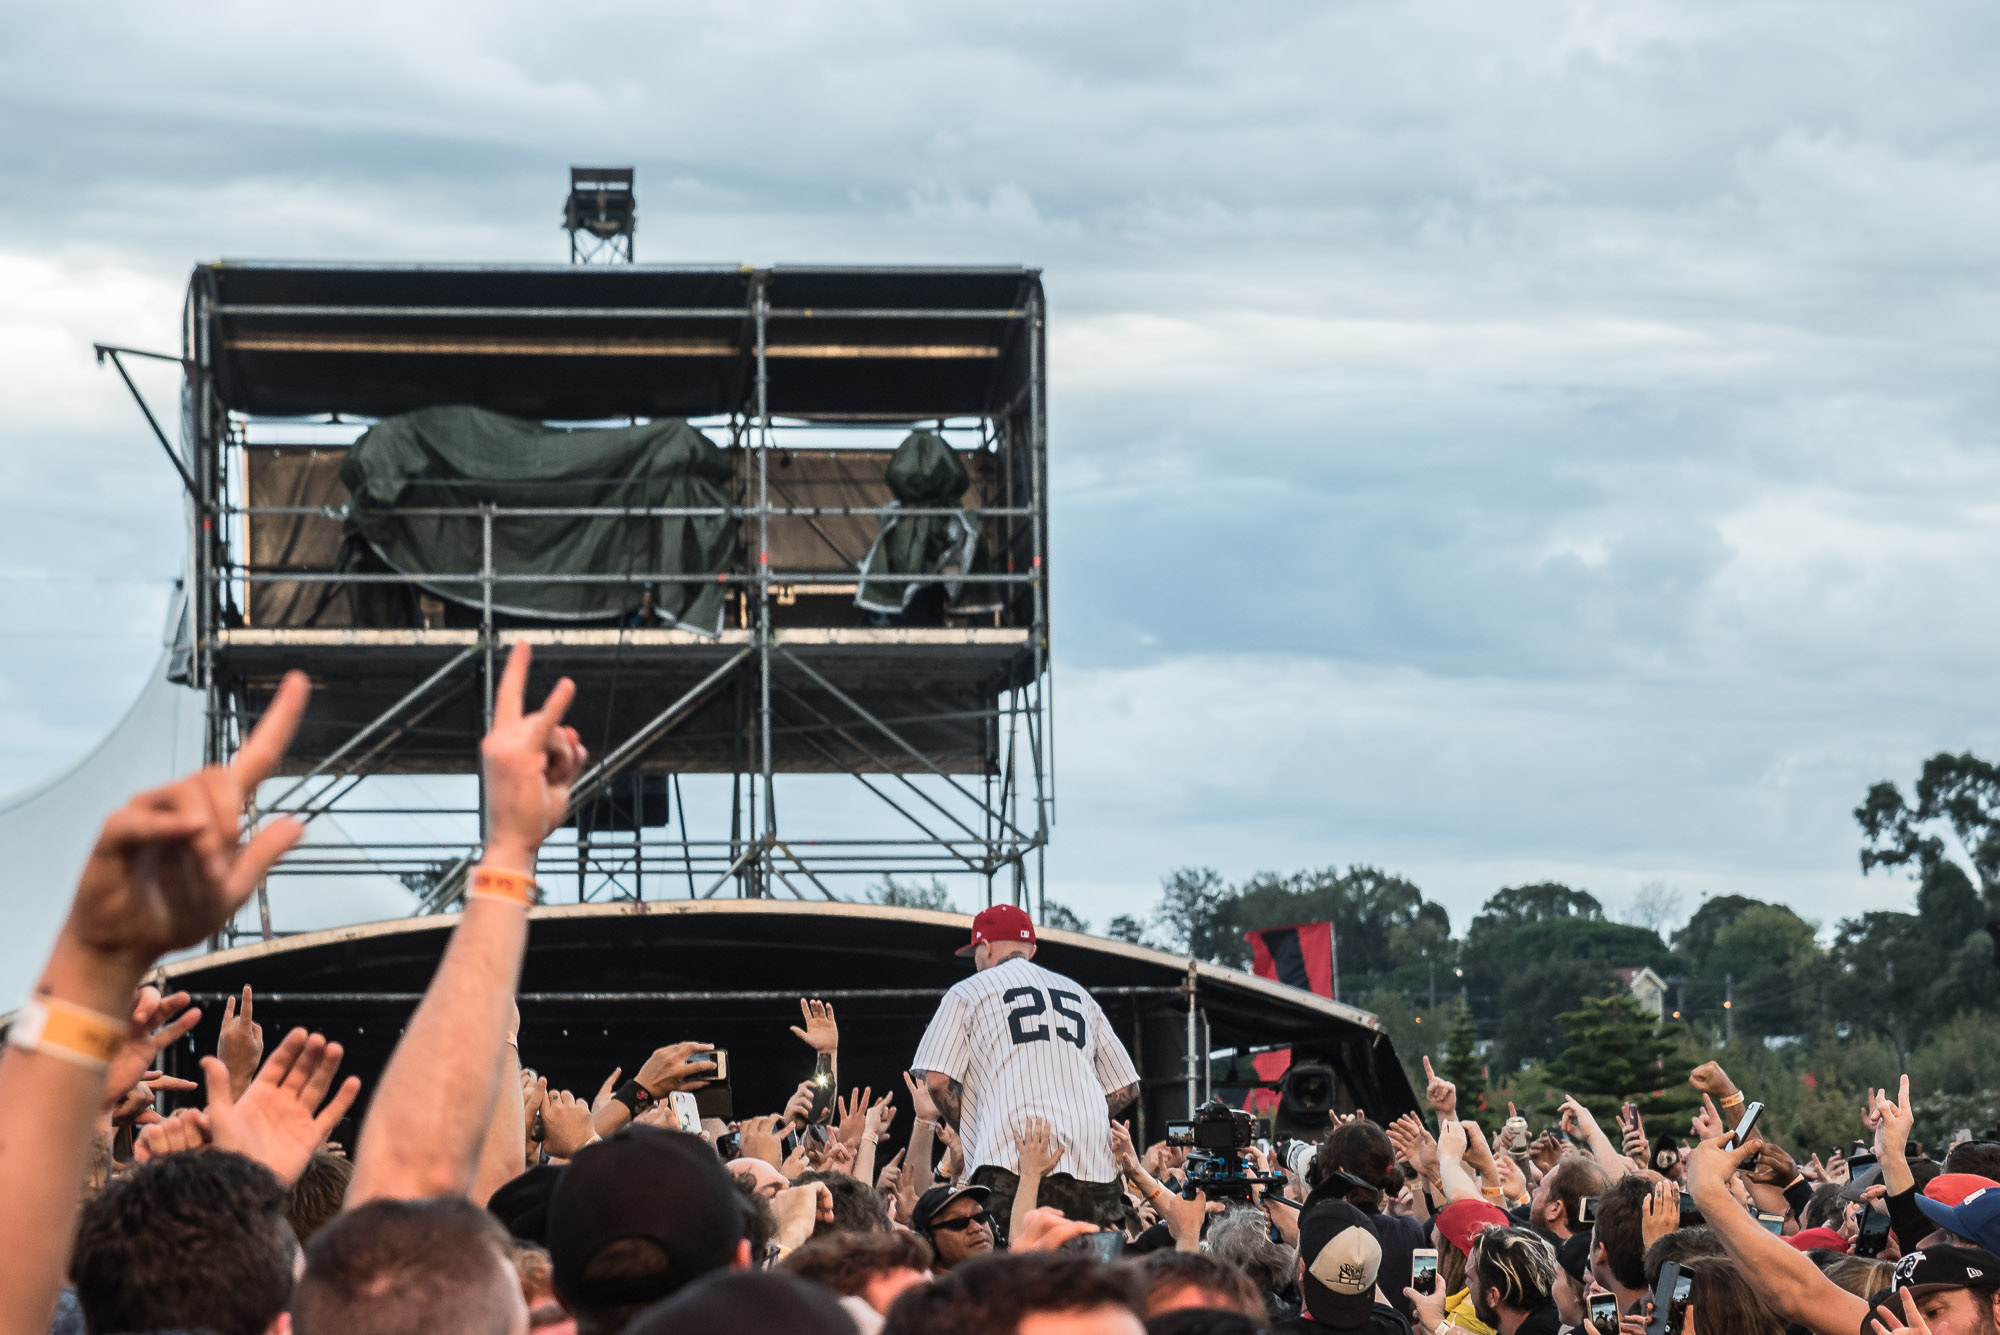 Download Festival Melbourne 2018 - Paul Tadday Photography - 047.jpg